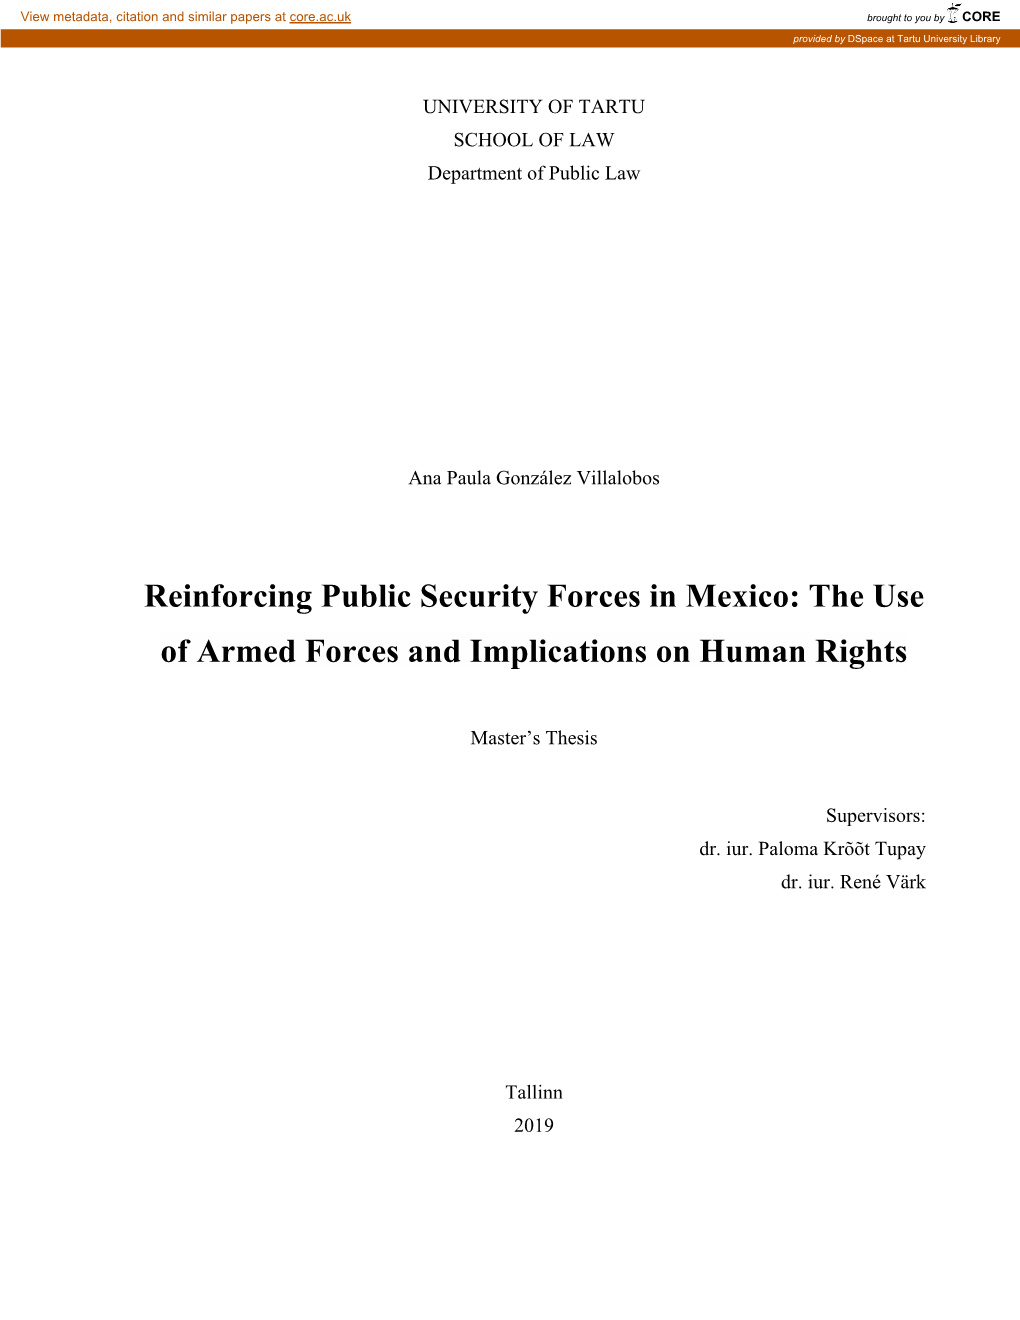 The Use of Armed Forces and Implications on Human Rights